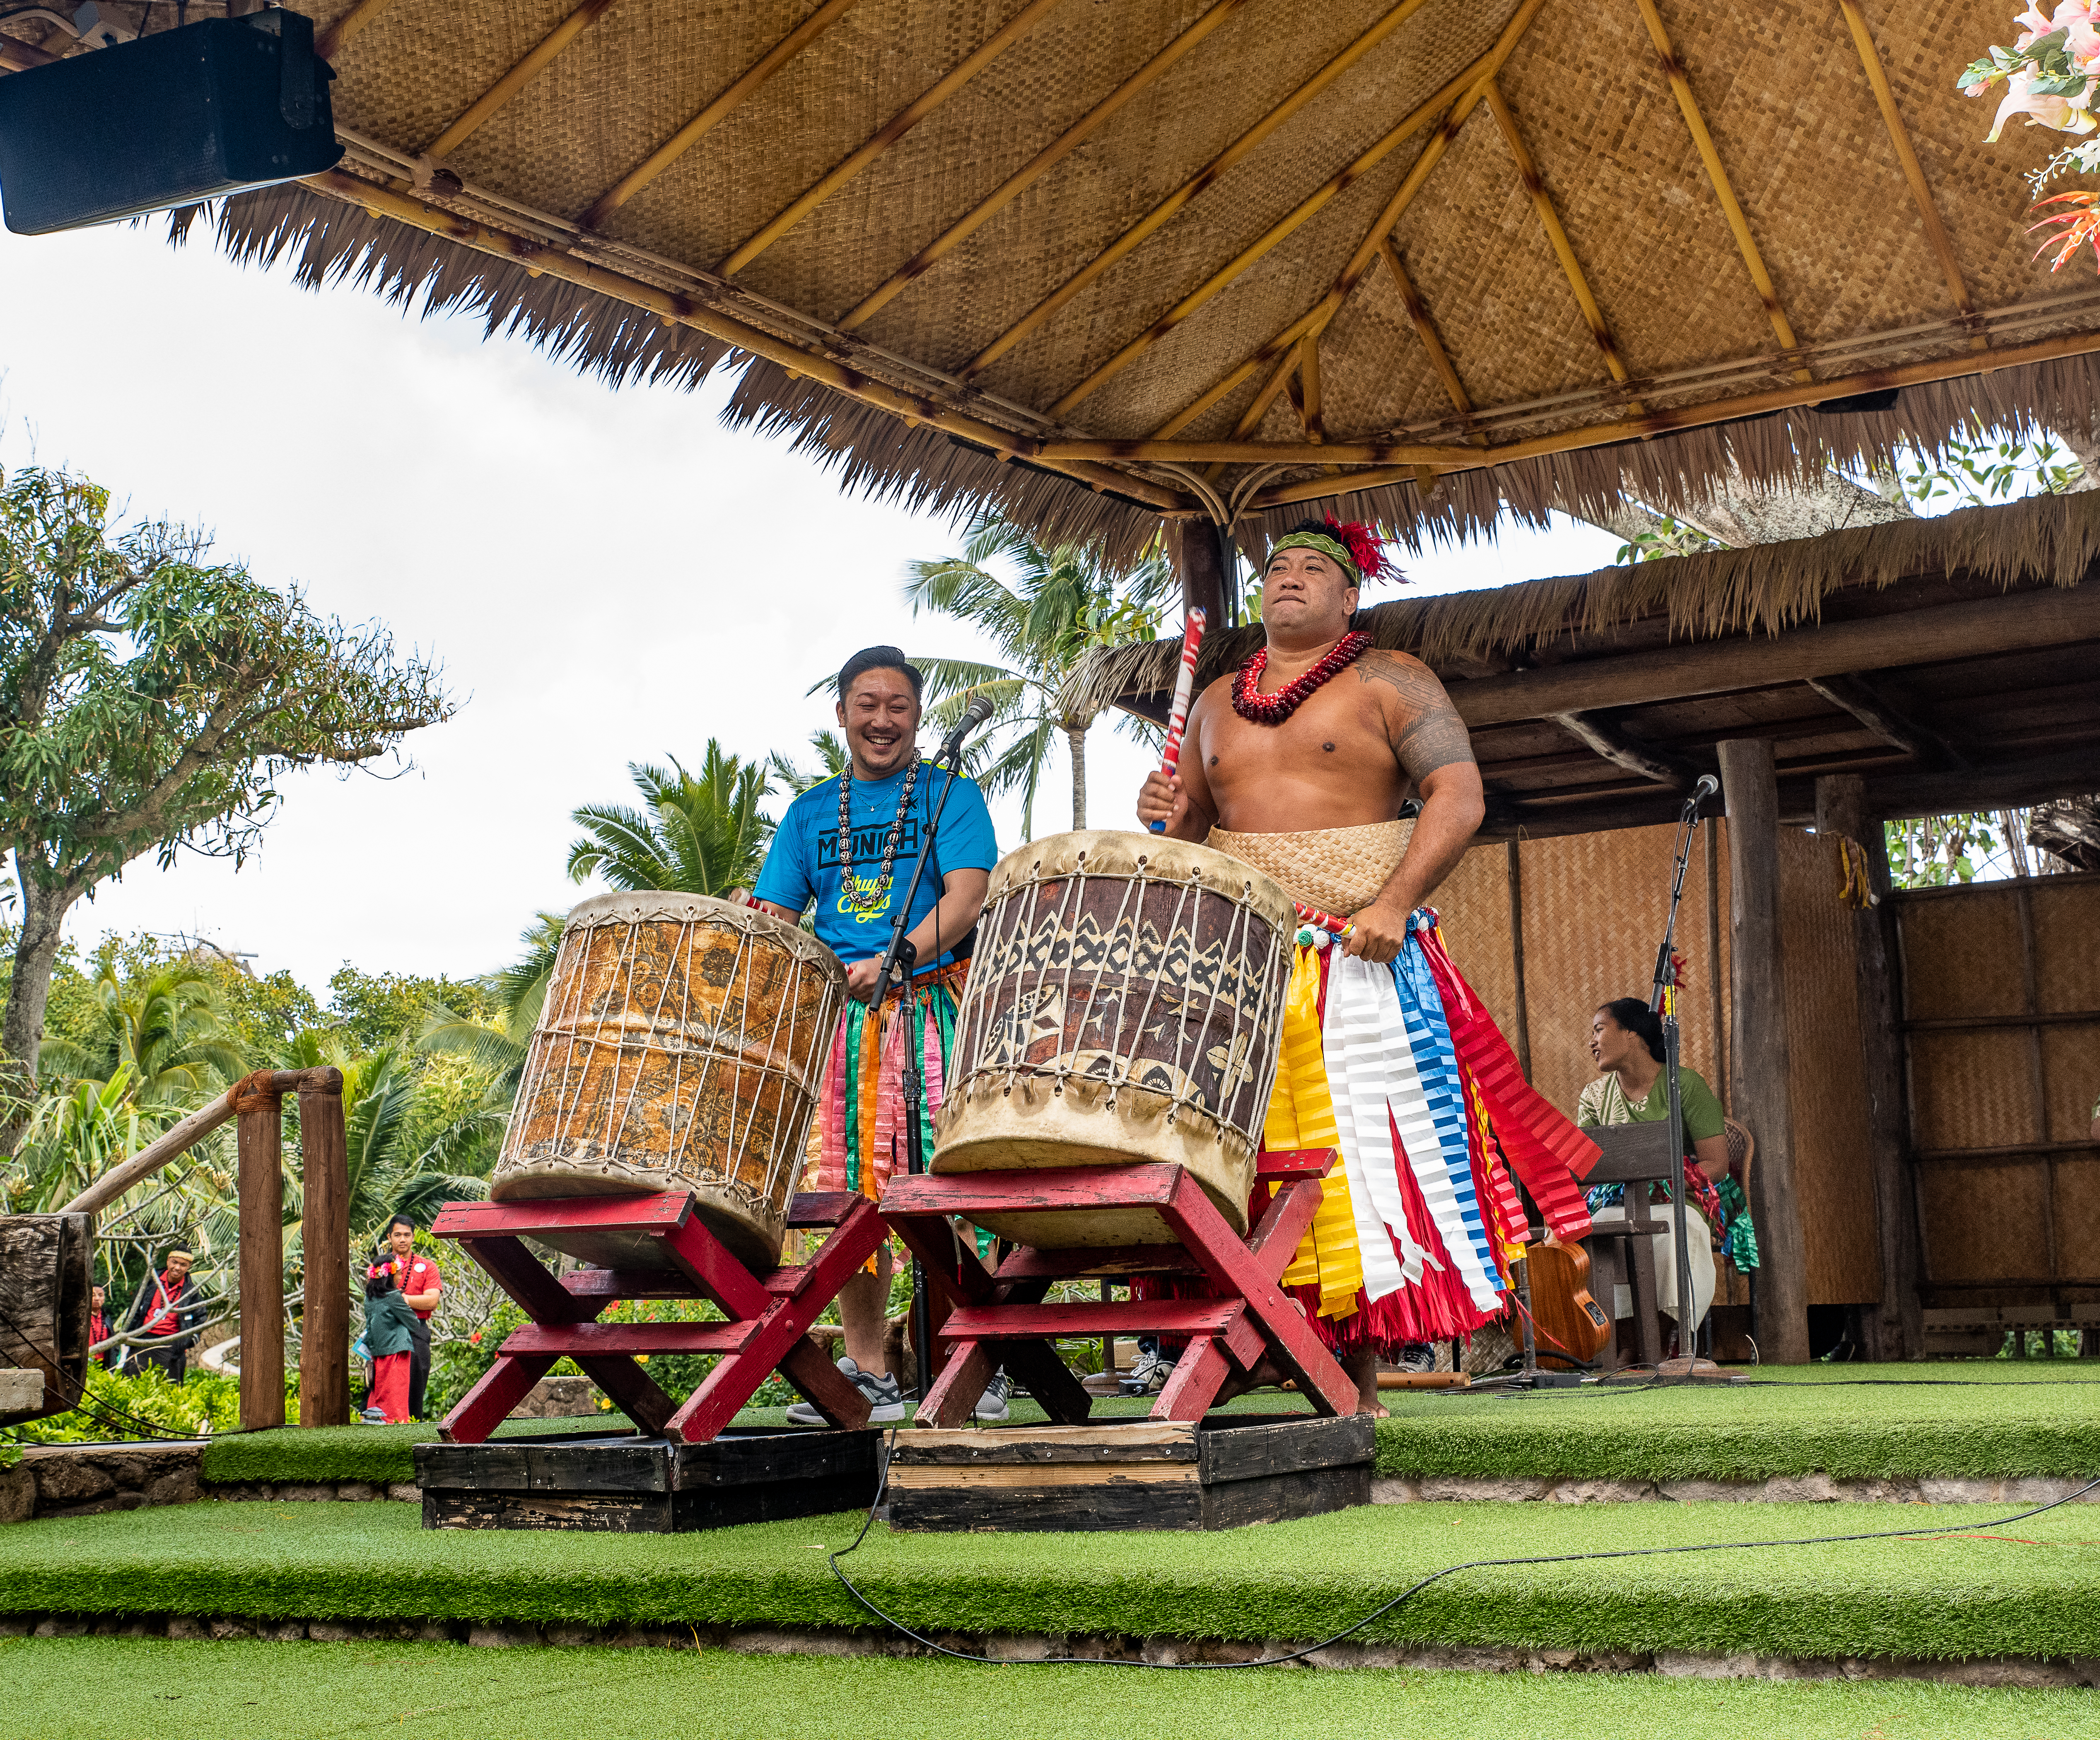 image of performer and guests at the Tonga Village performance at the Polynesian Cultural Center